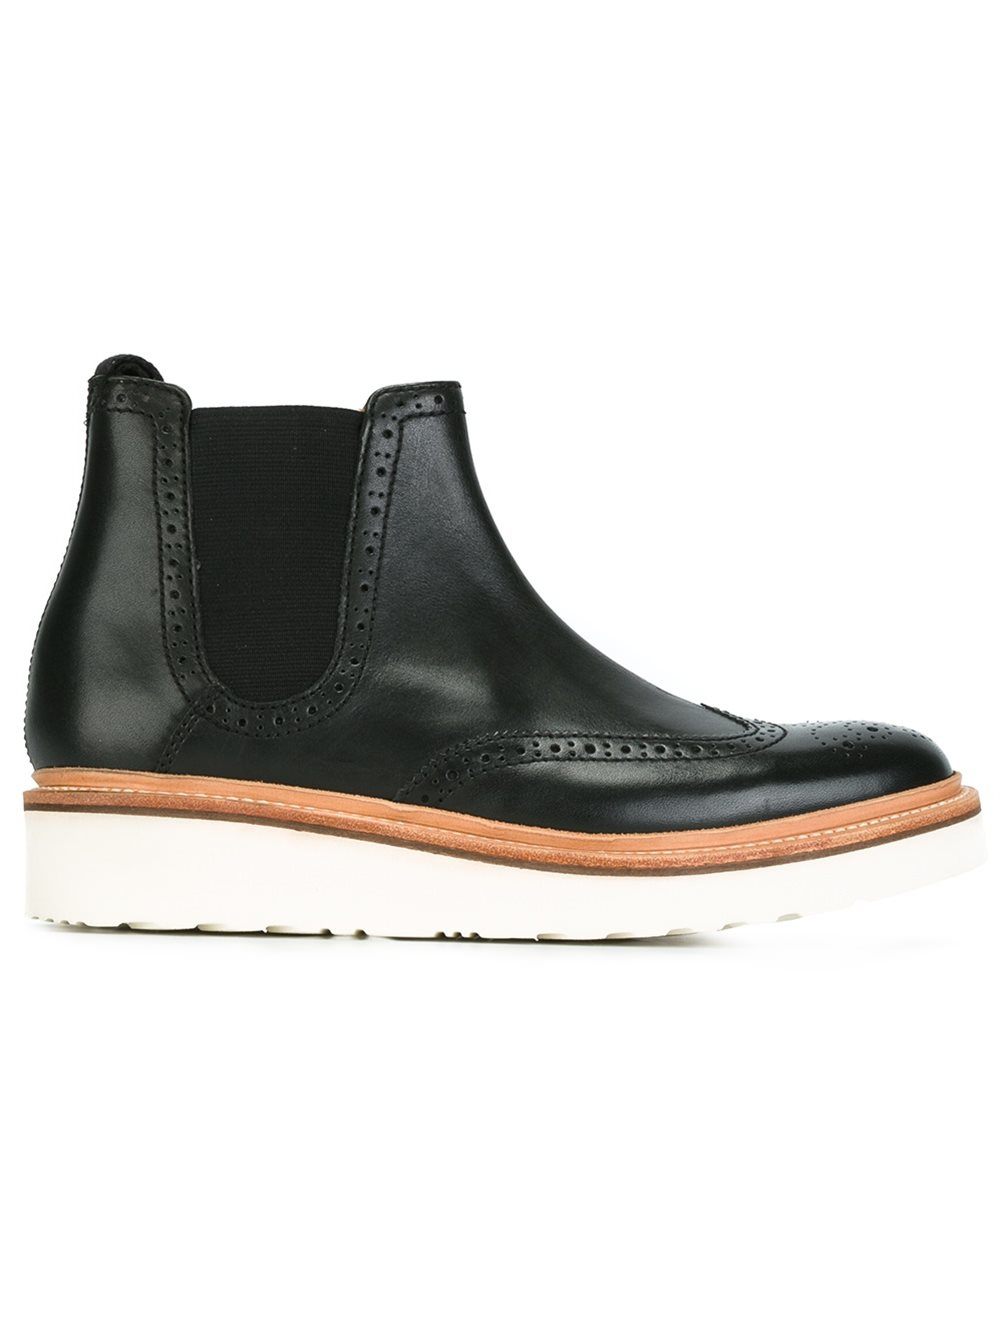 Grenson Leather 'alice' Boots in Black - Lyst